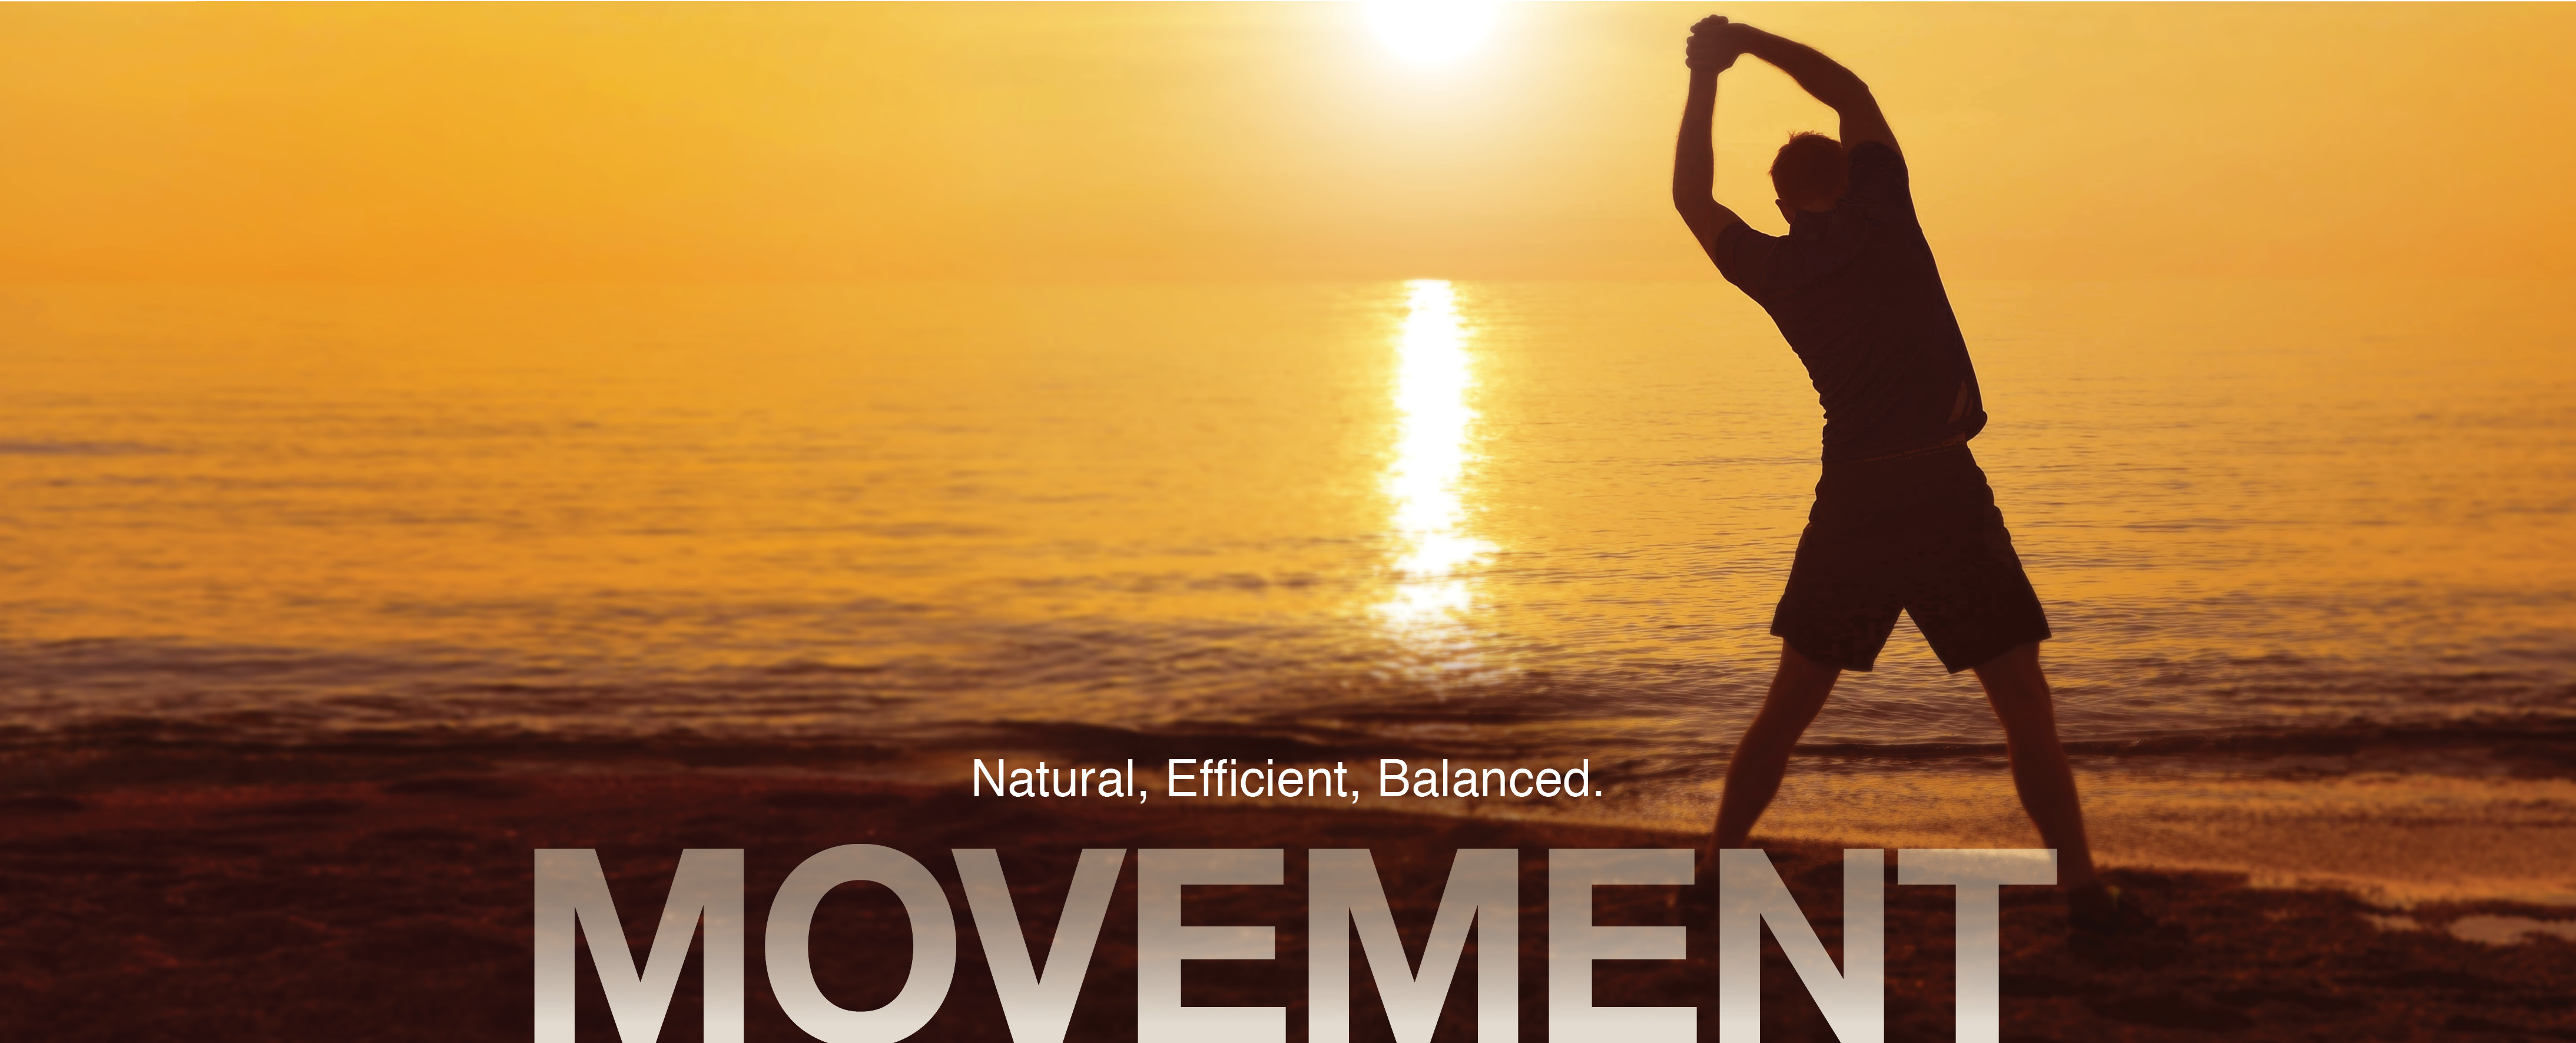 Great-Lakes-Chiropractic-Movement-Center-Nature-Movement_Slide